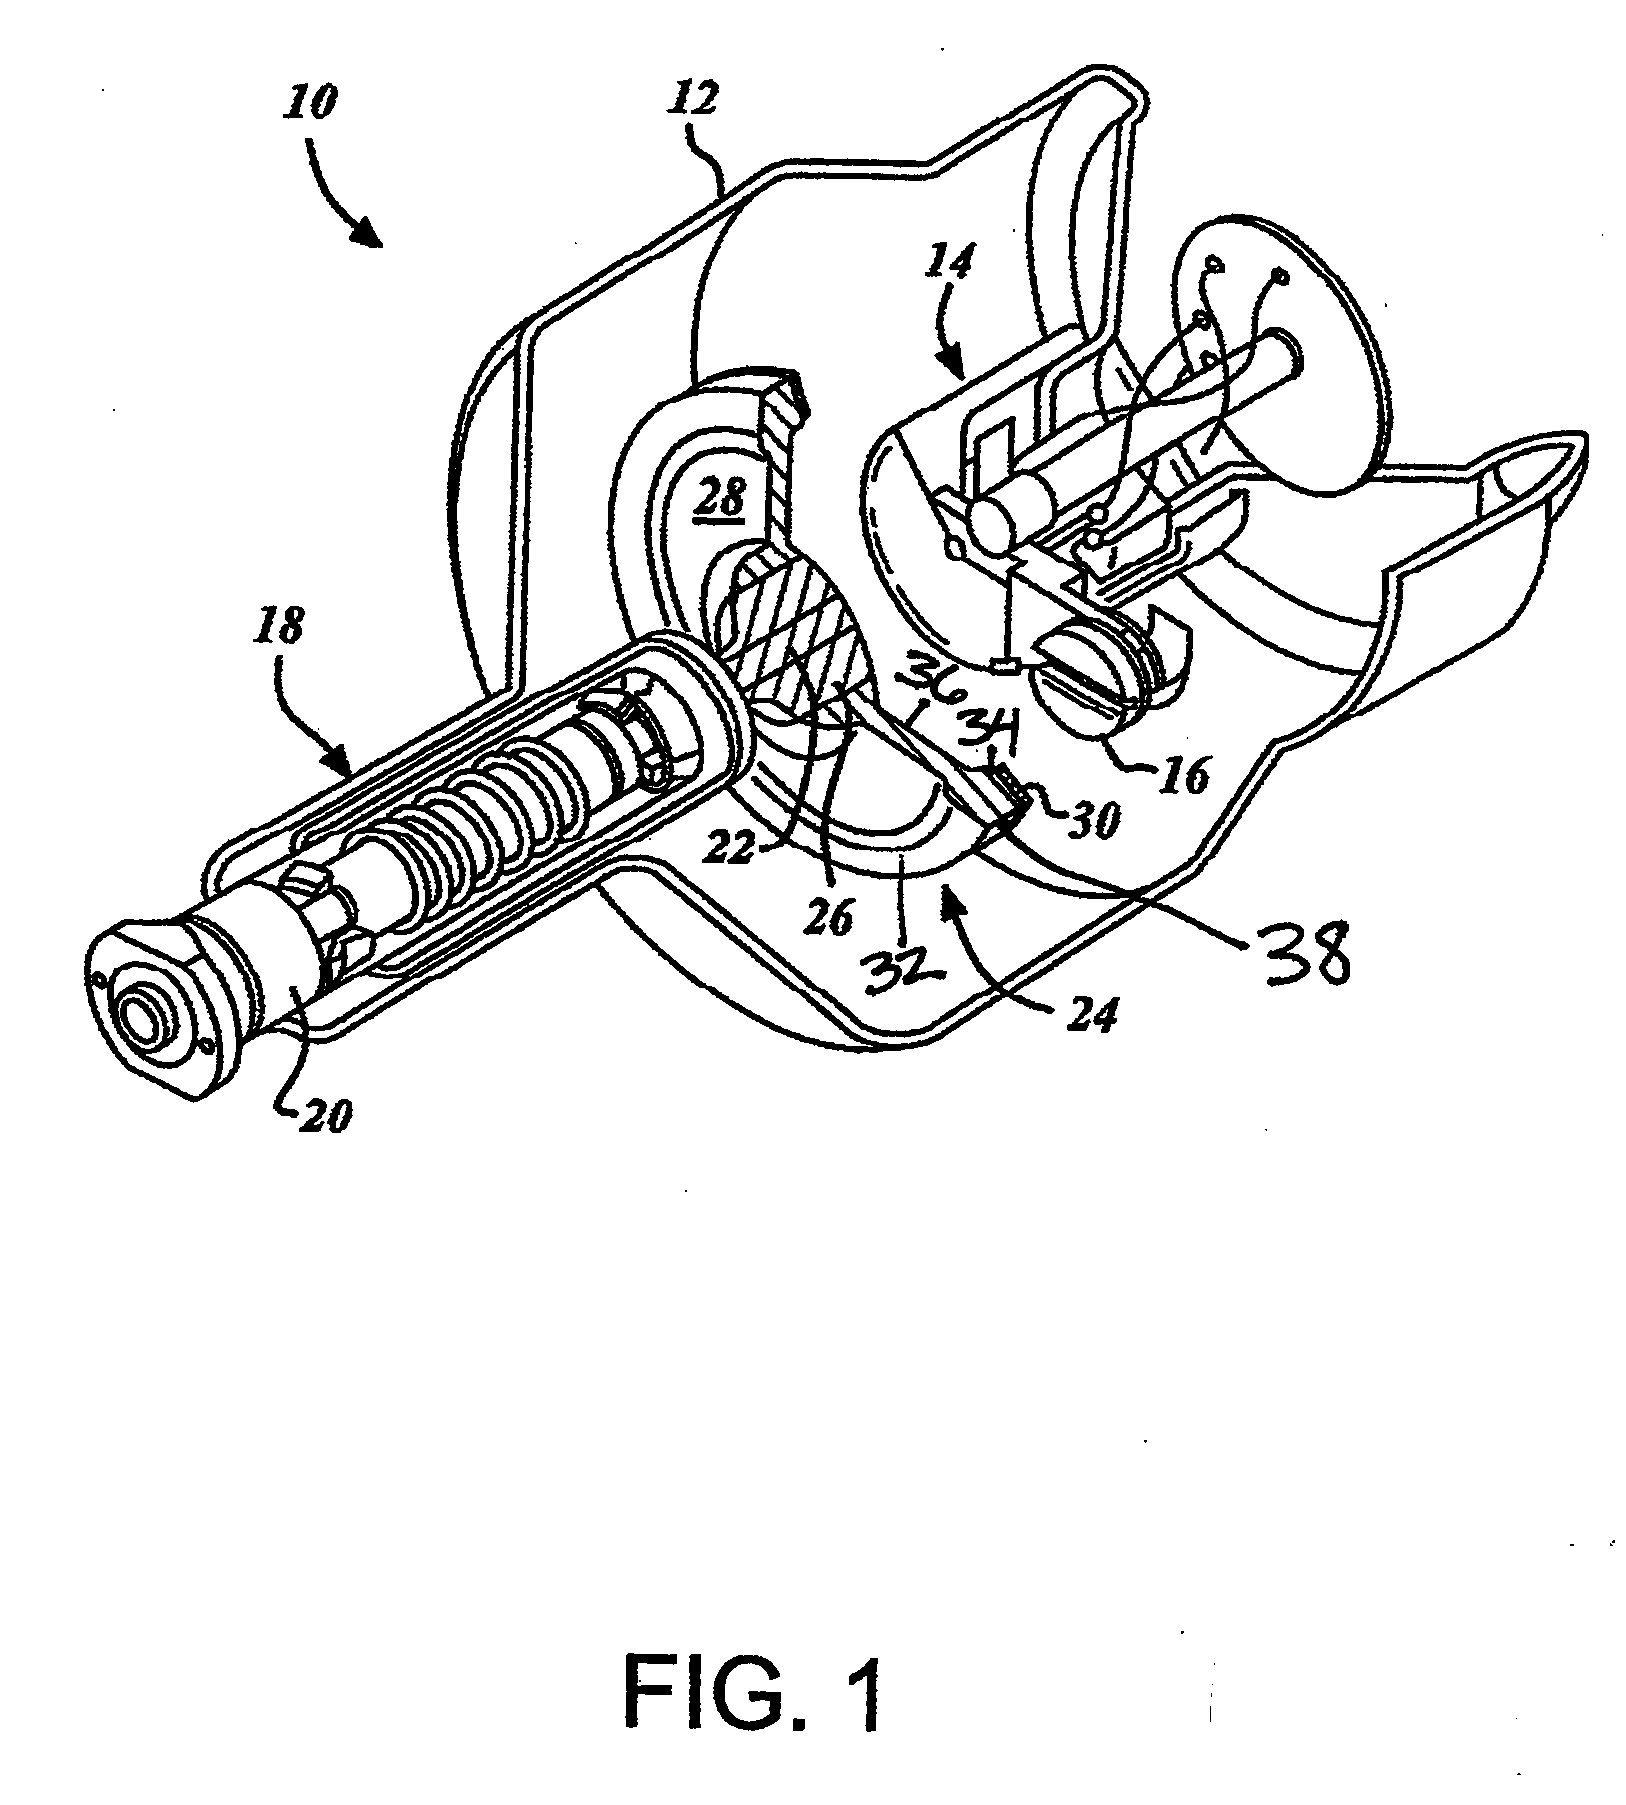 X-ray tube target assembly and method of manufacturing same